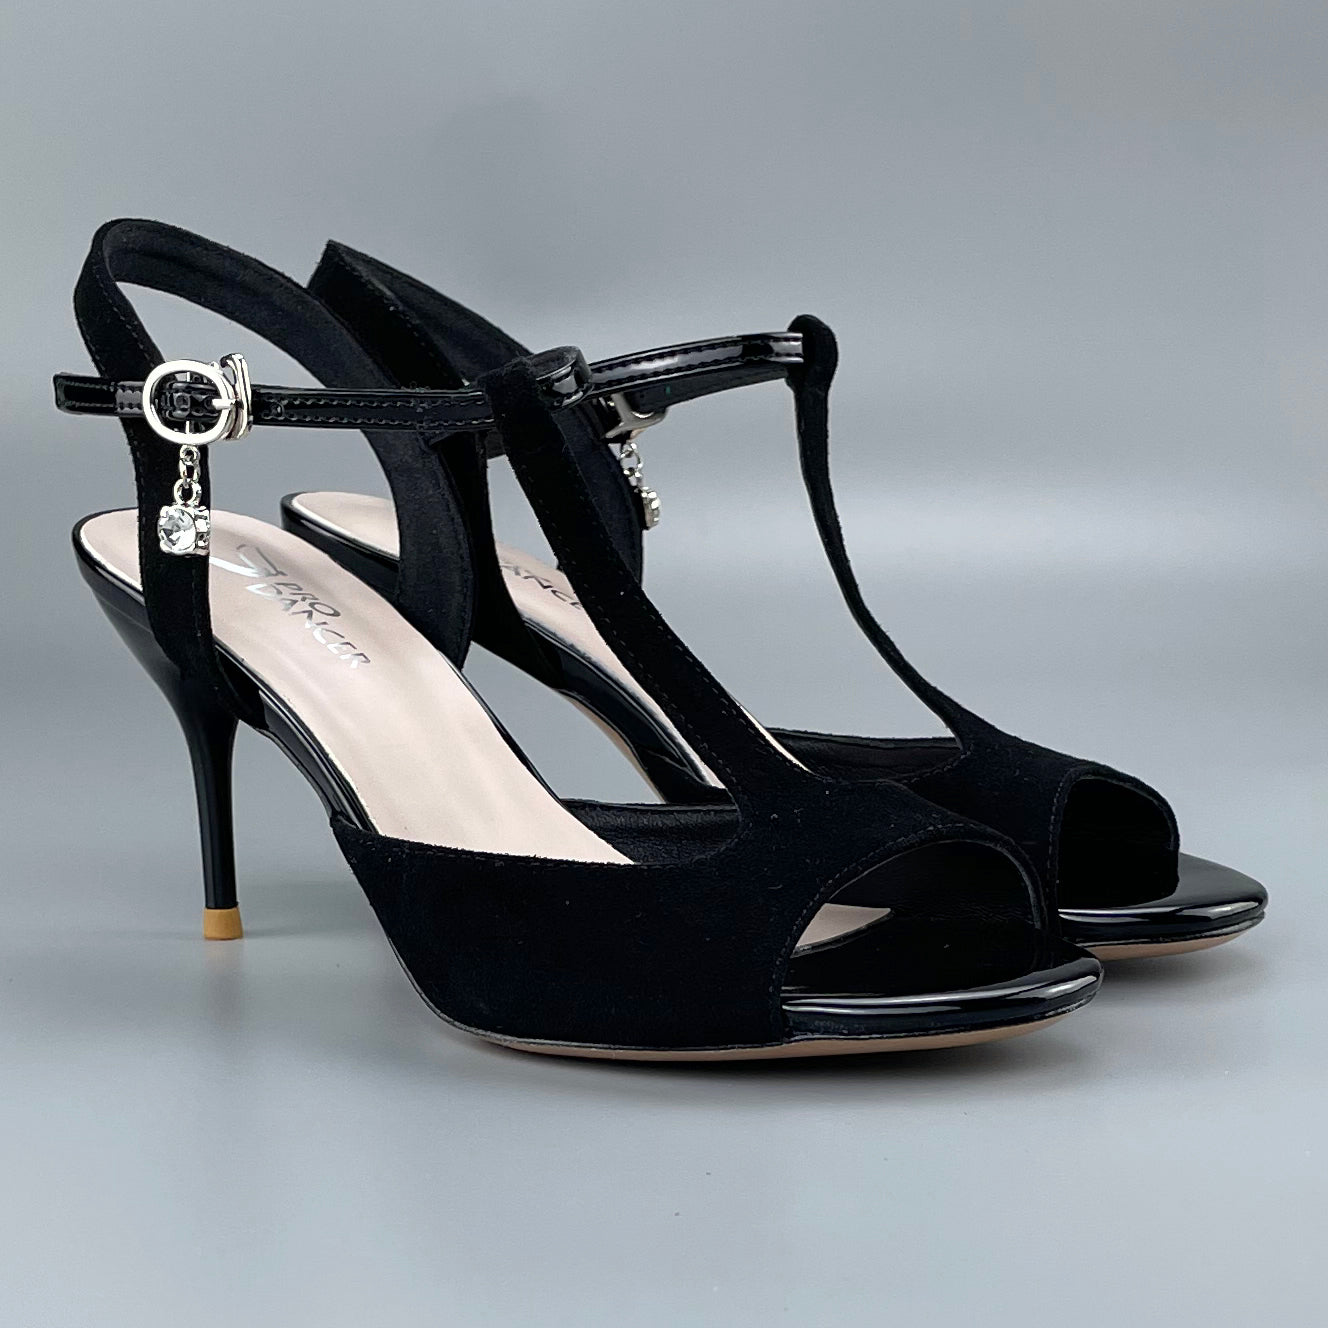 Pro Dancer open-toe and open-back Argentine Tango shoes with high salsa heels and hard leather sole sandals in black (PD-9046A)6